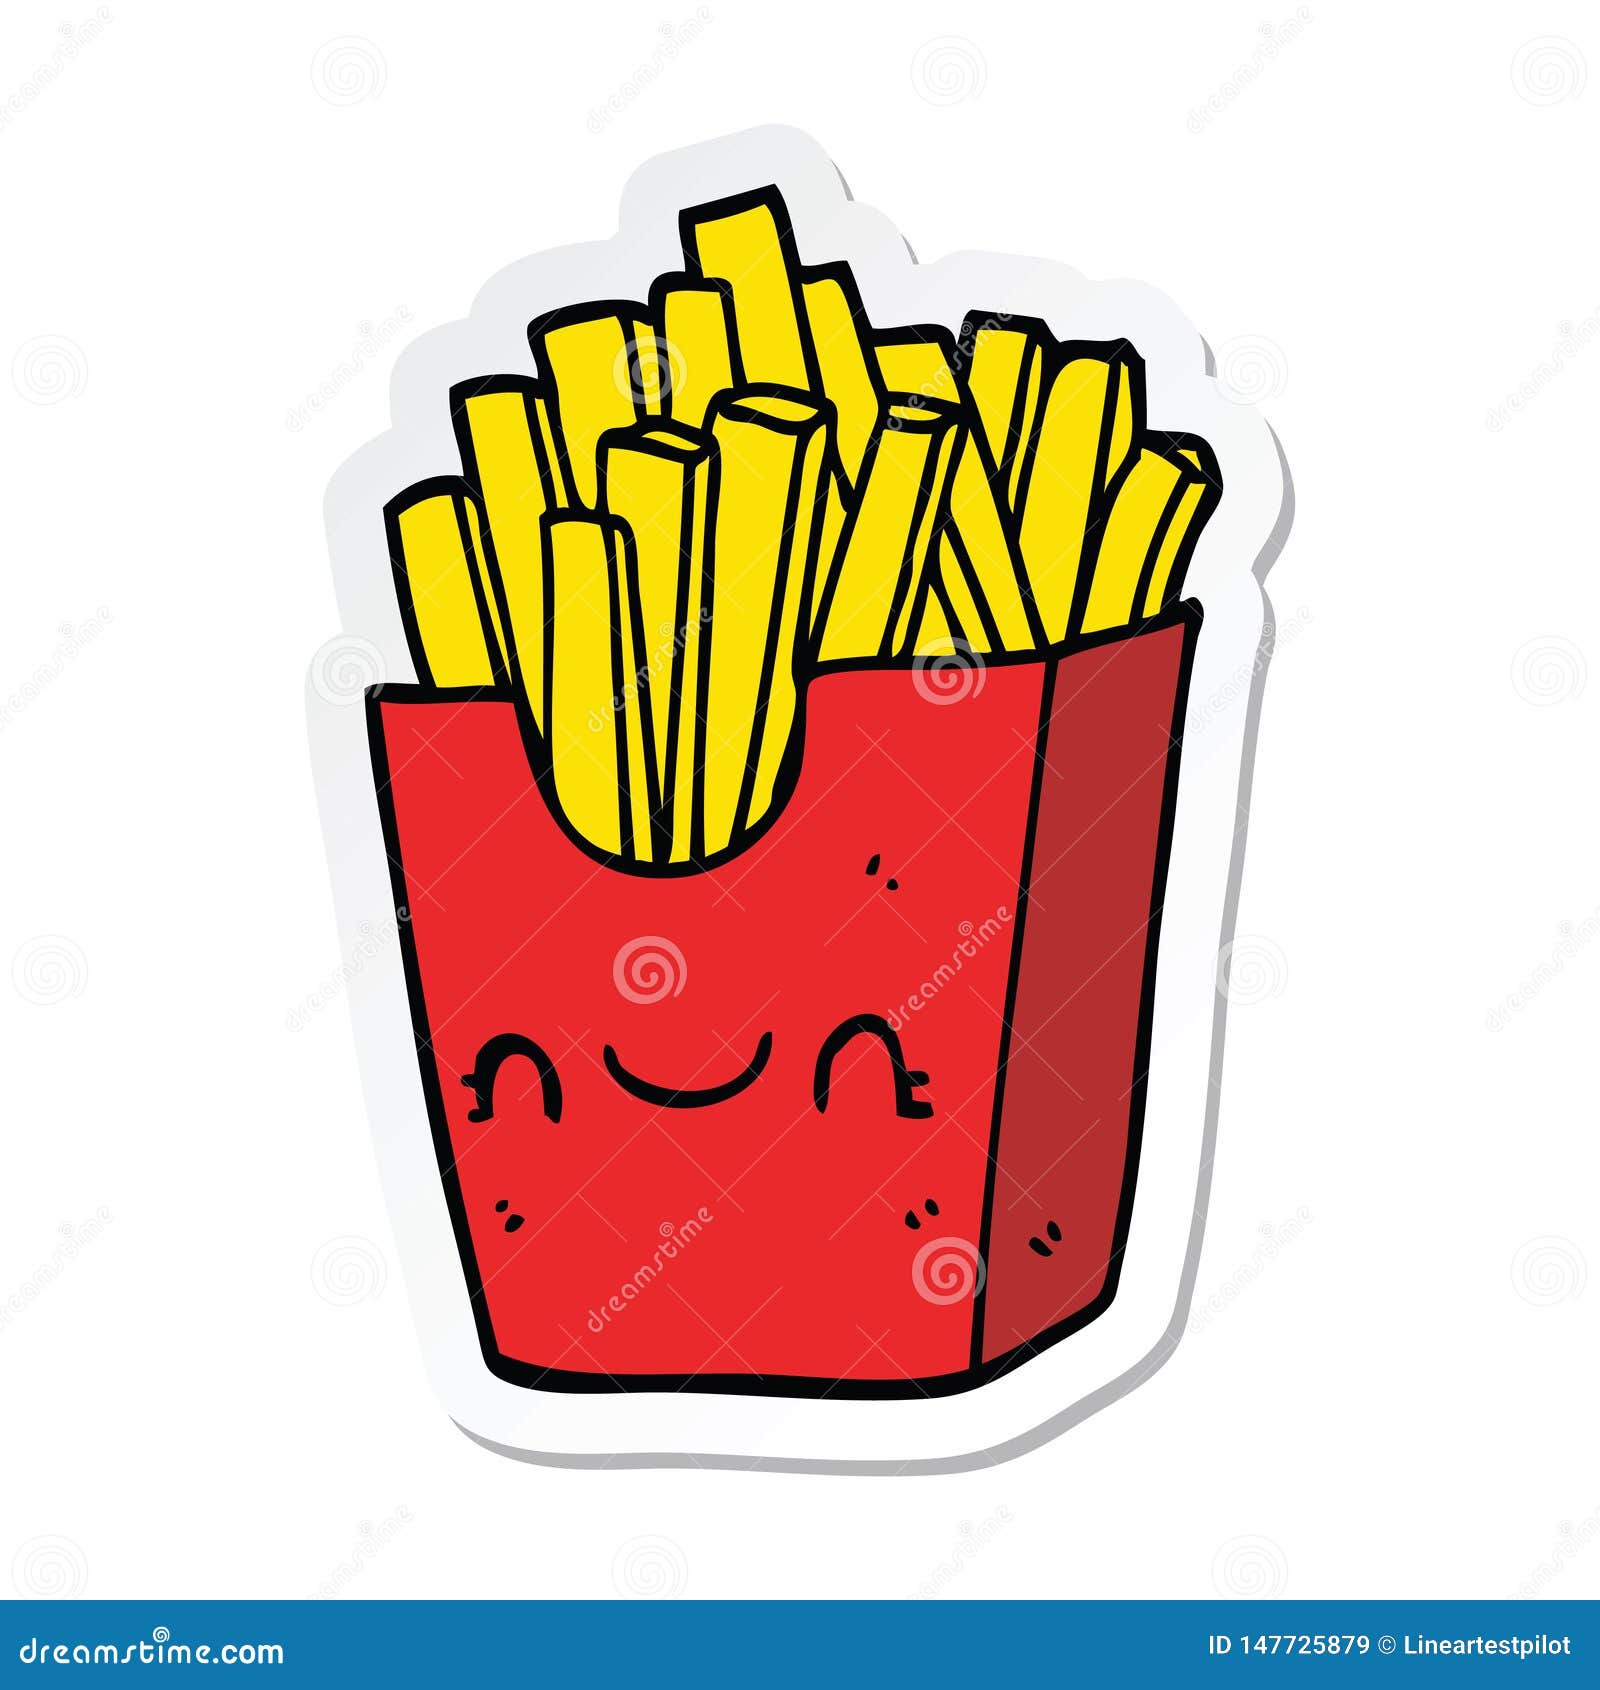 Sticker of a Cartoon Fries in Box Stock Vector - Illustration of takeout,  stick: 147725879